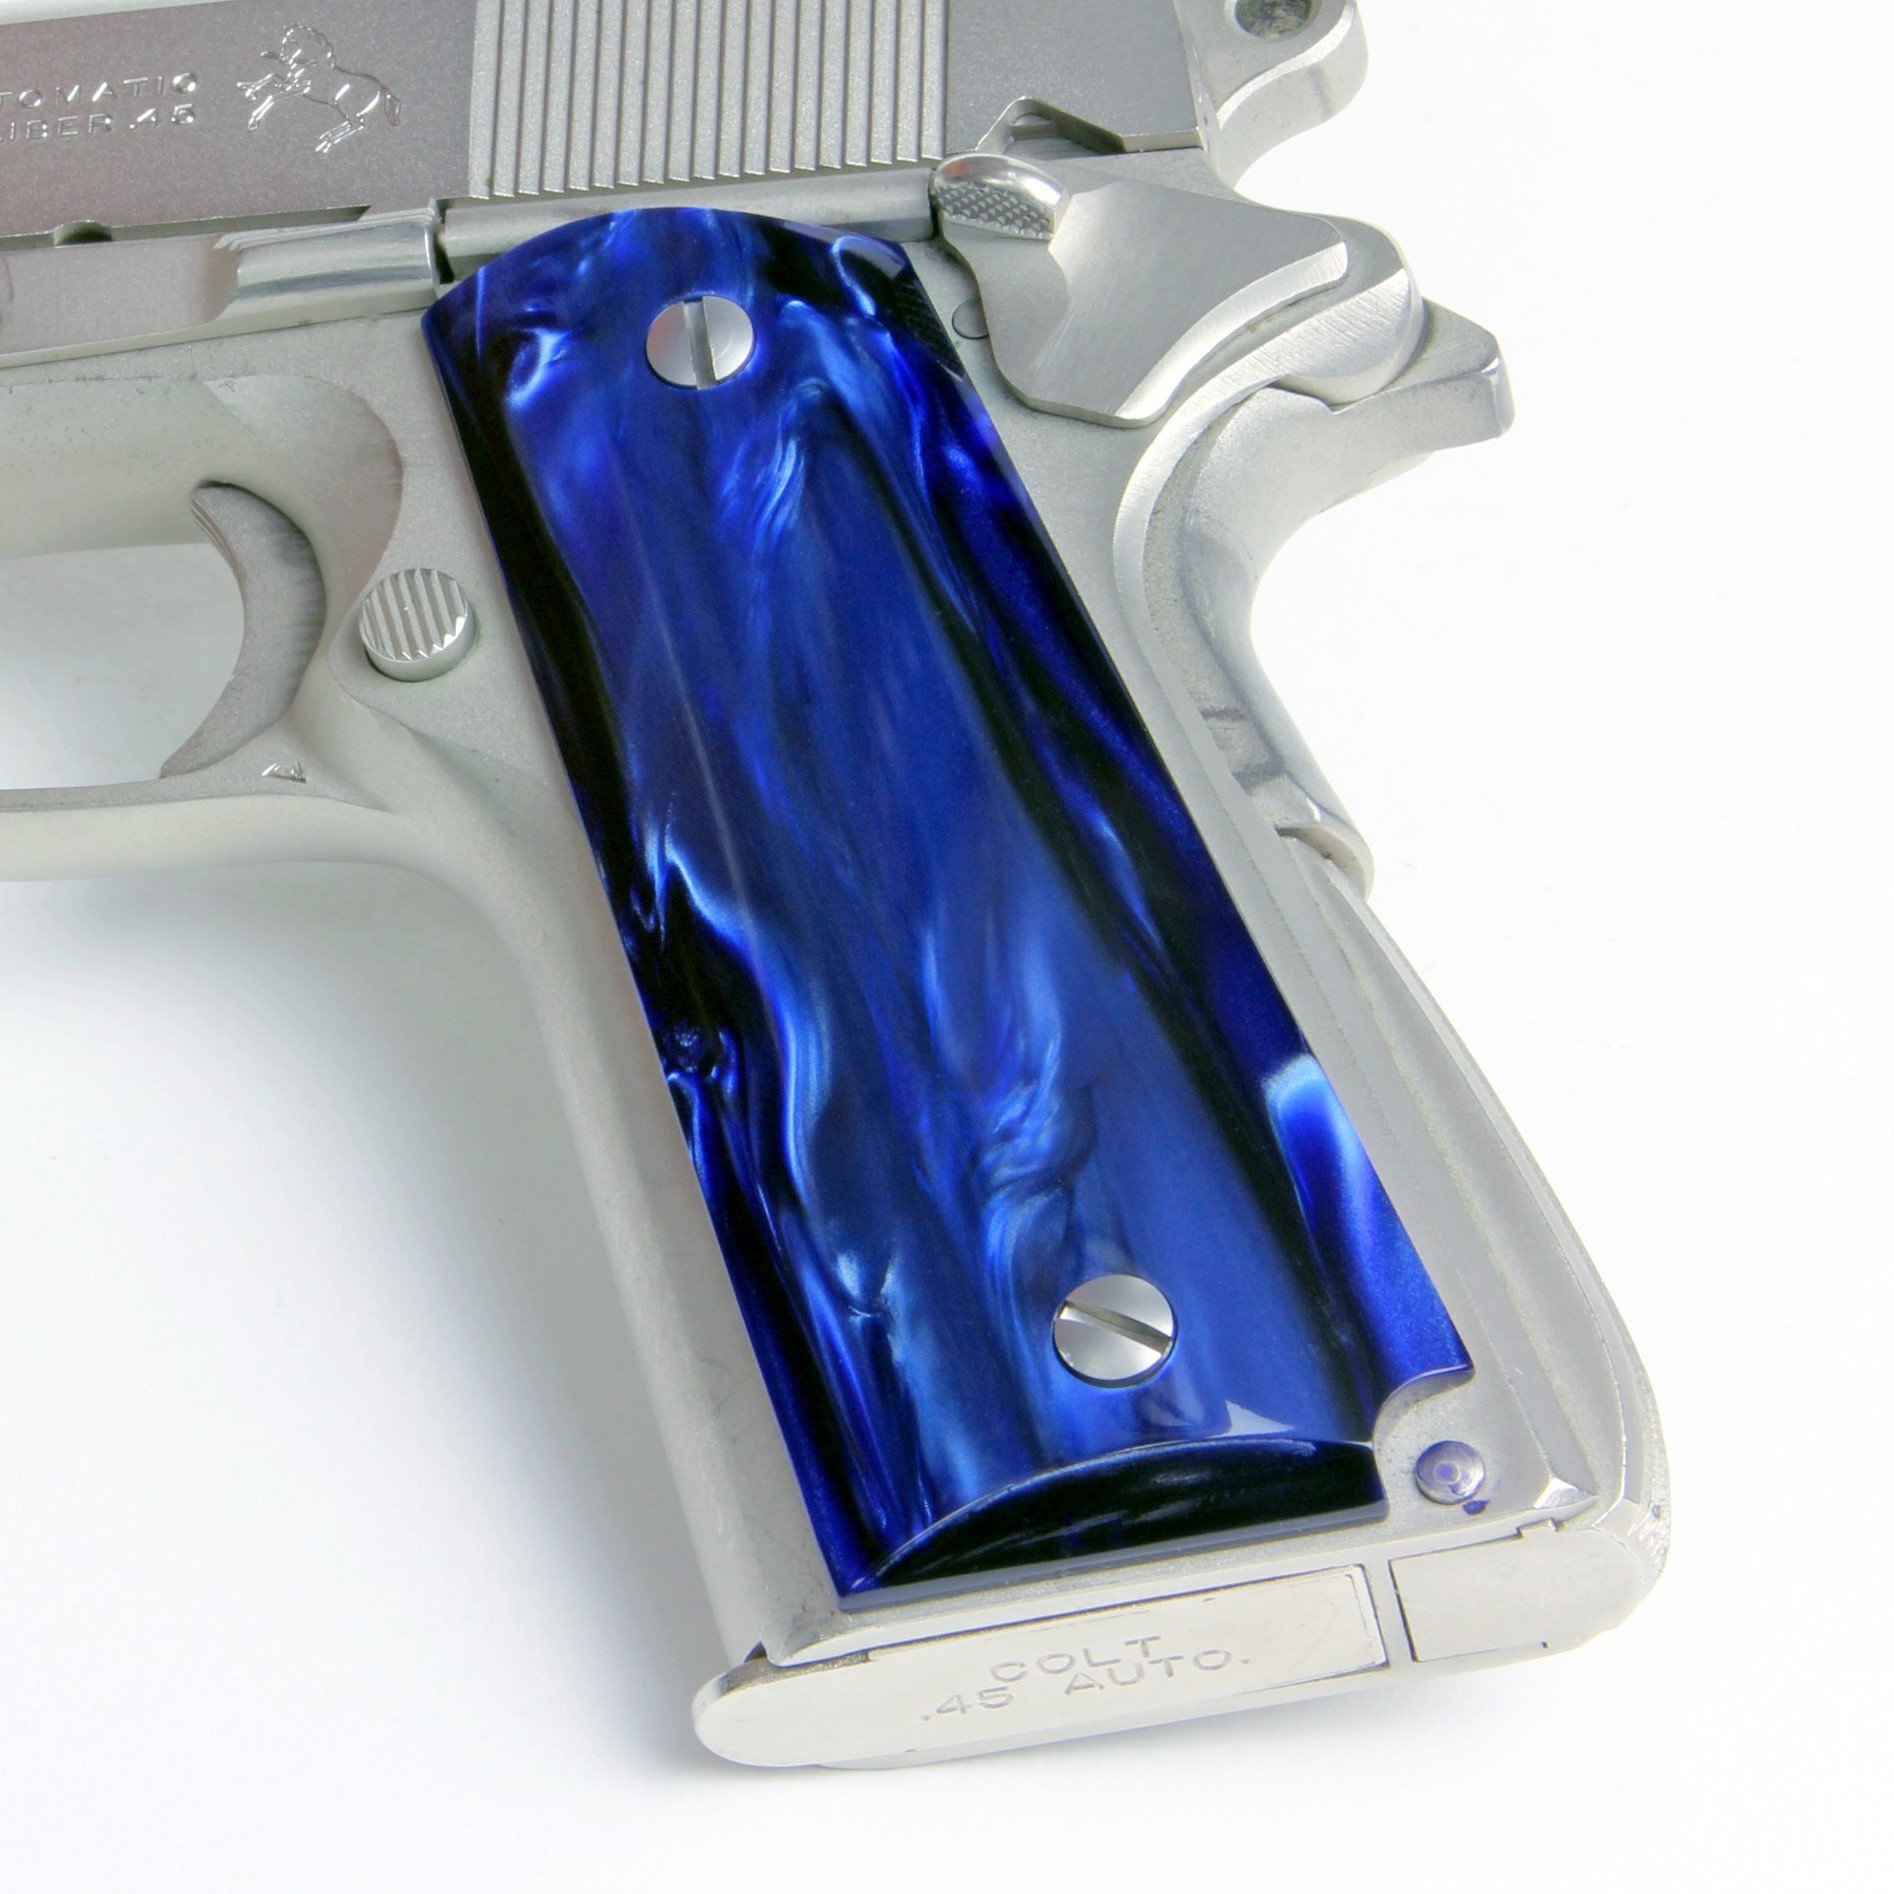 NEW RESIN PEARL GRIPS EAGLE STYLE FOR COLT 1911,CLONE,KIMBER PISTOL FULL SIZE 